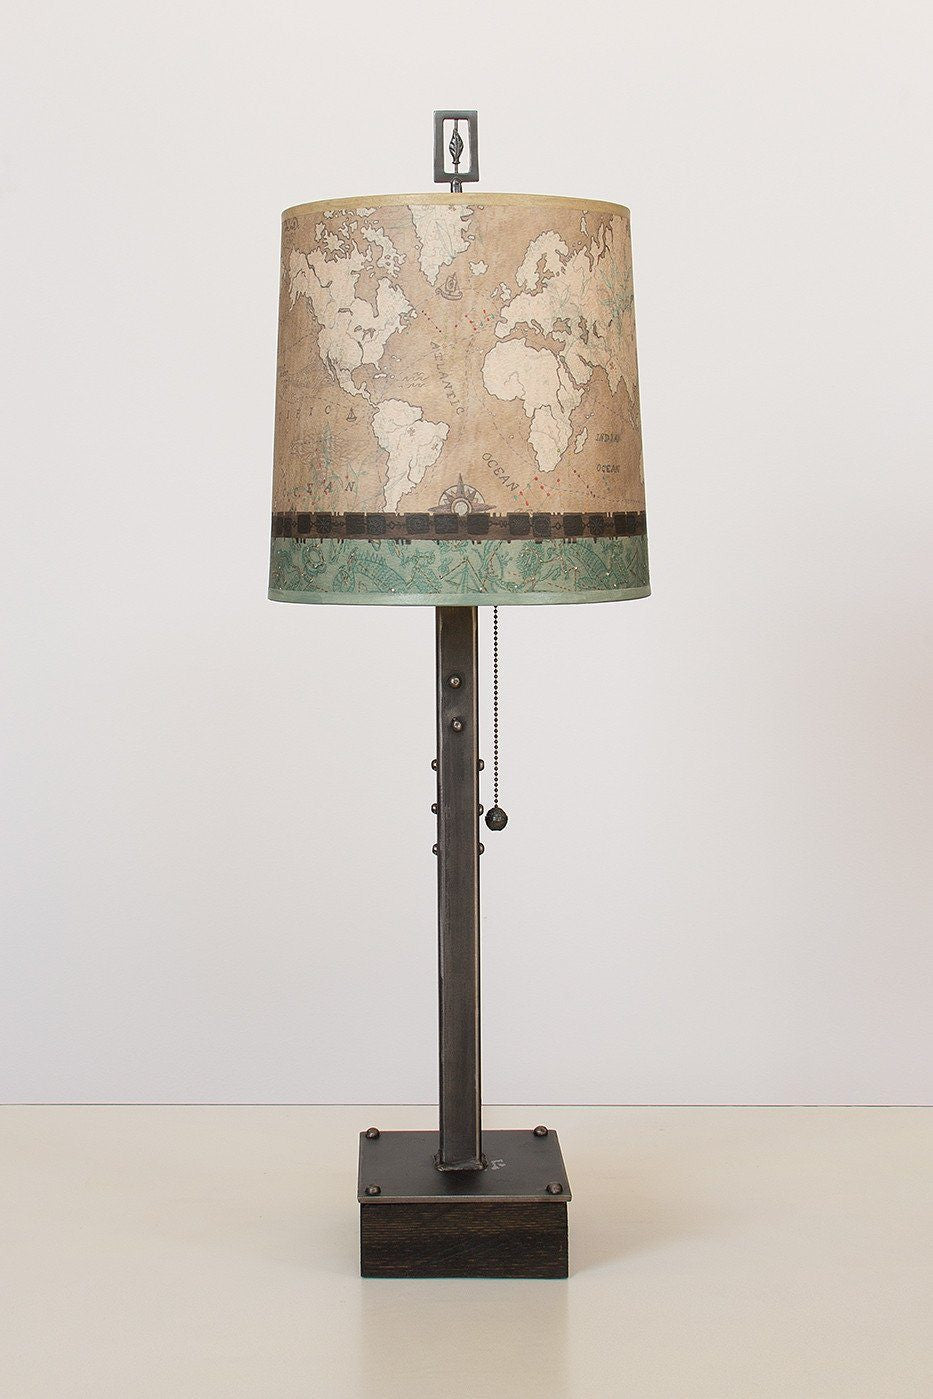 Janna Ugone & Co Table Lamps Steel Table Lamp on Wood with Medium Drum Shade in Voyages